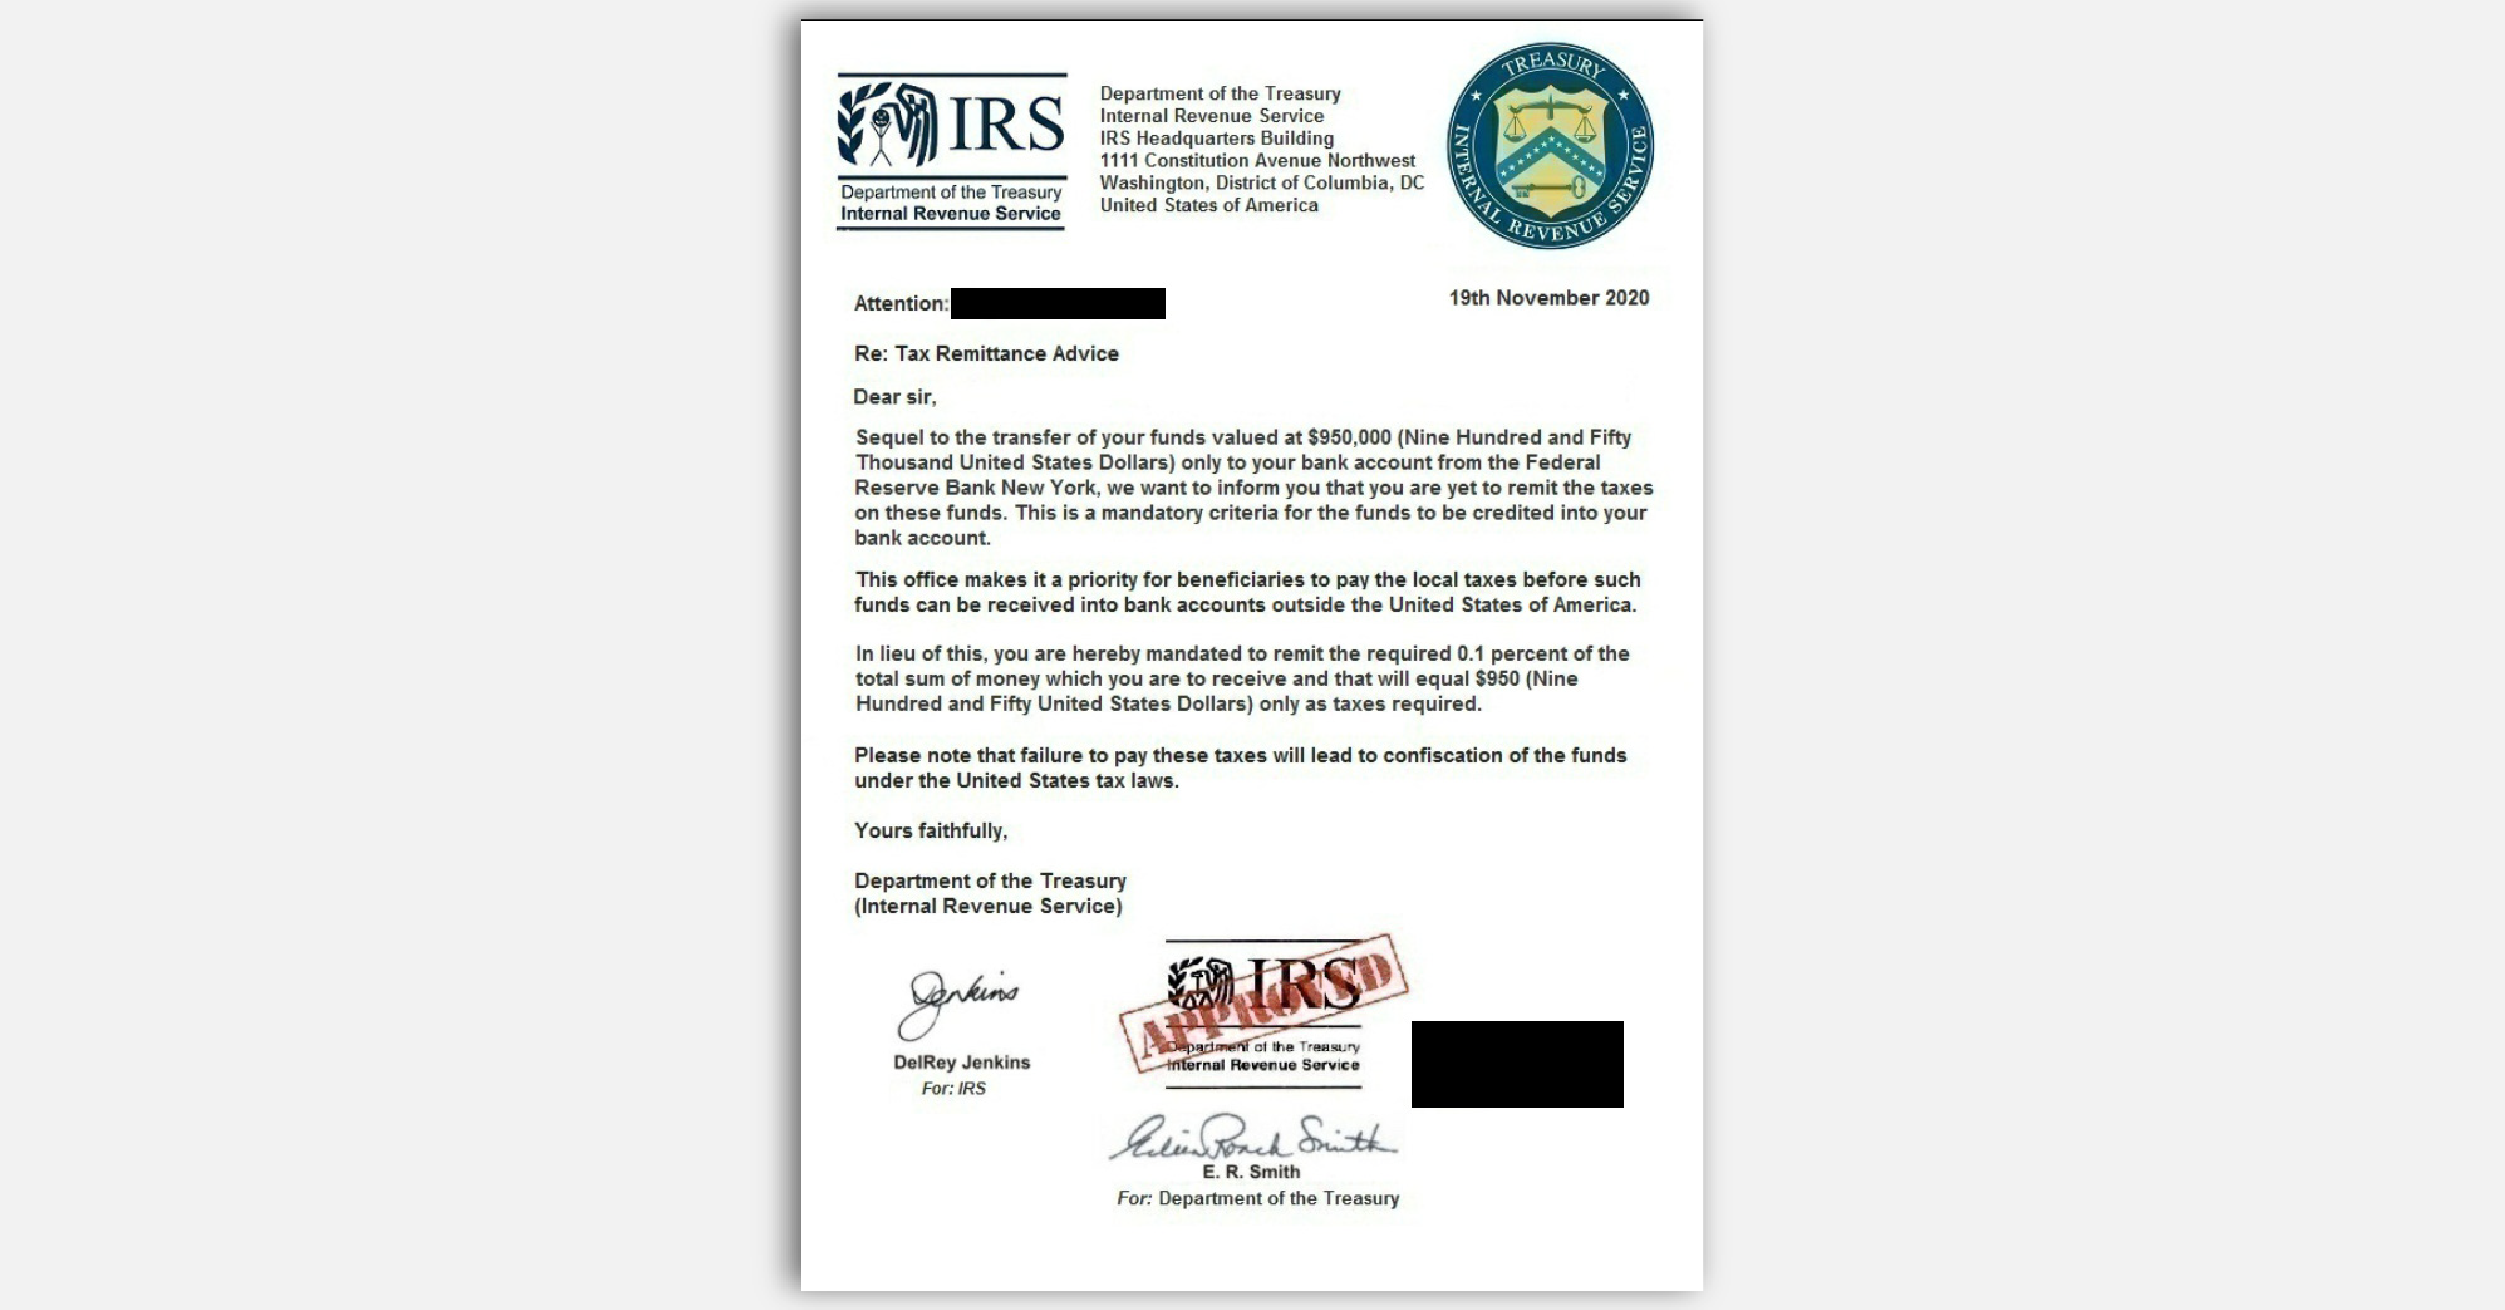 FTC impersonator scam fake IRS letter